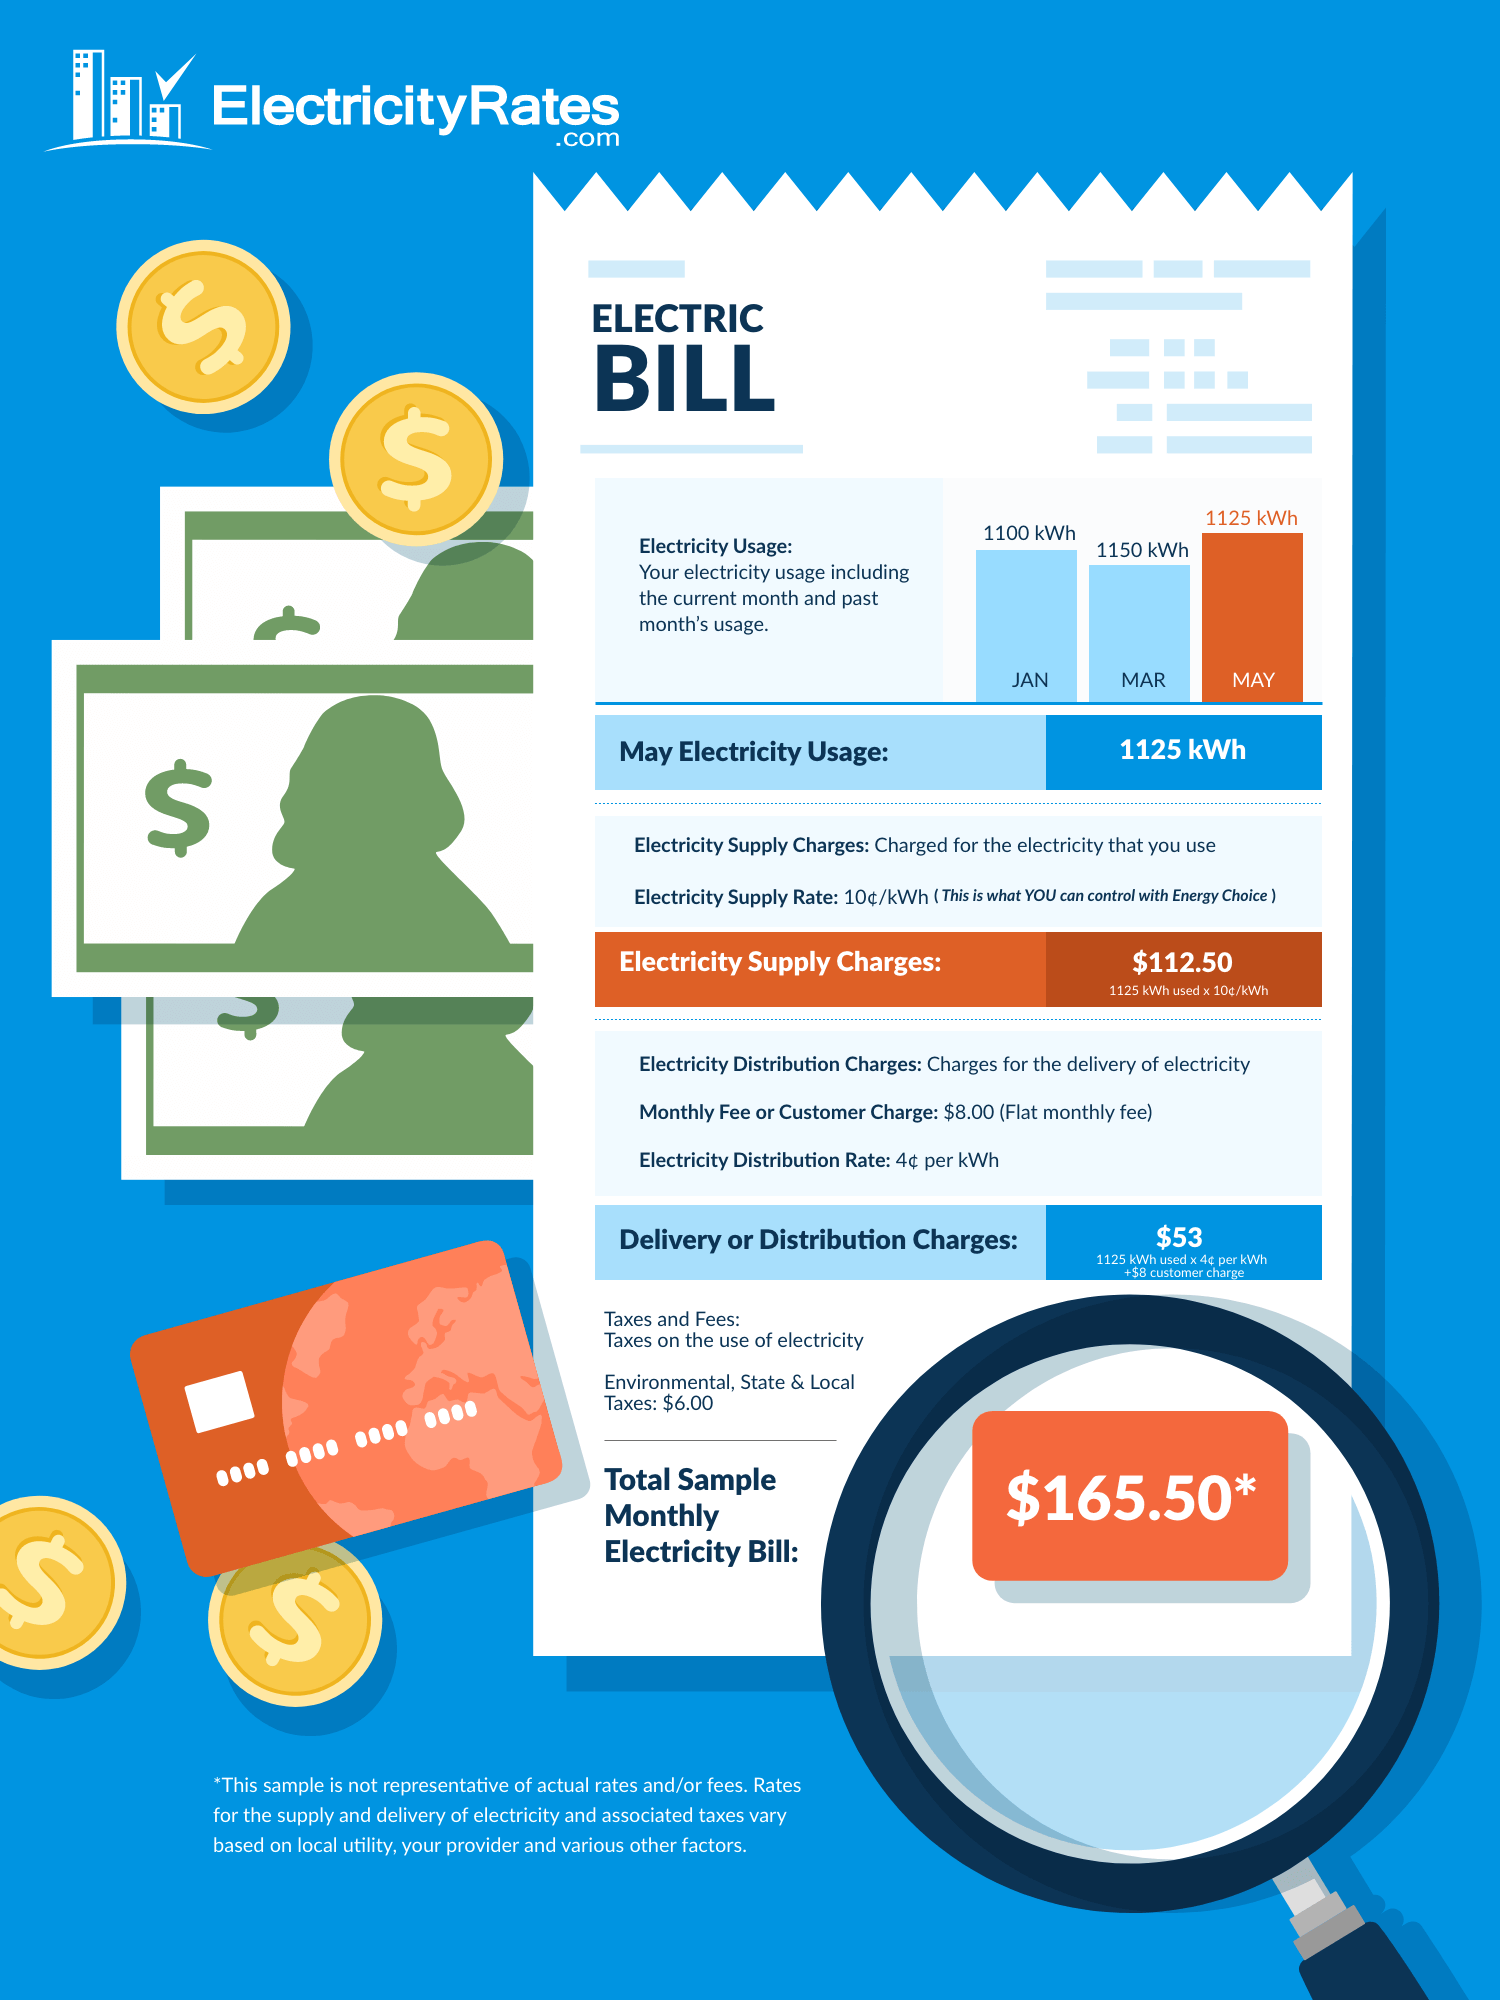 Overview of your Texas electricity bill